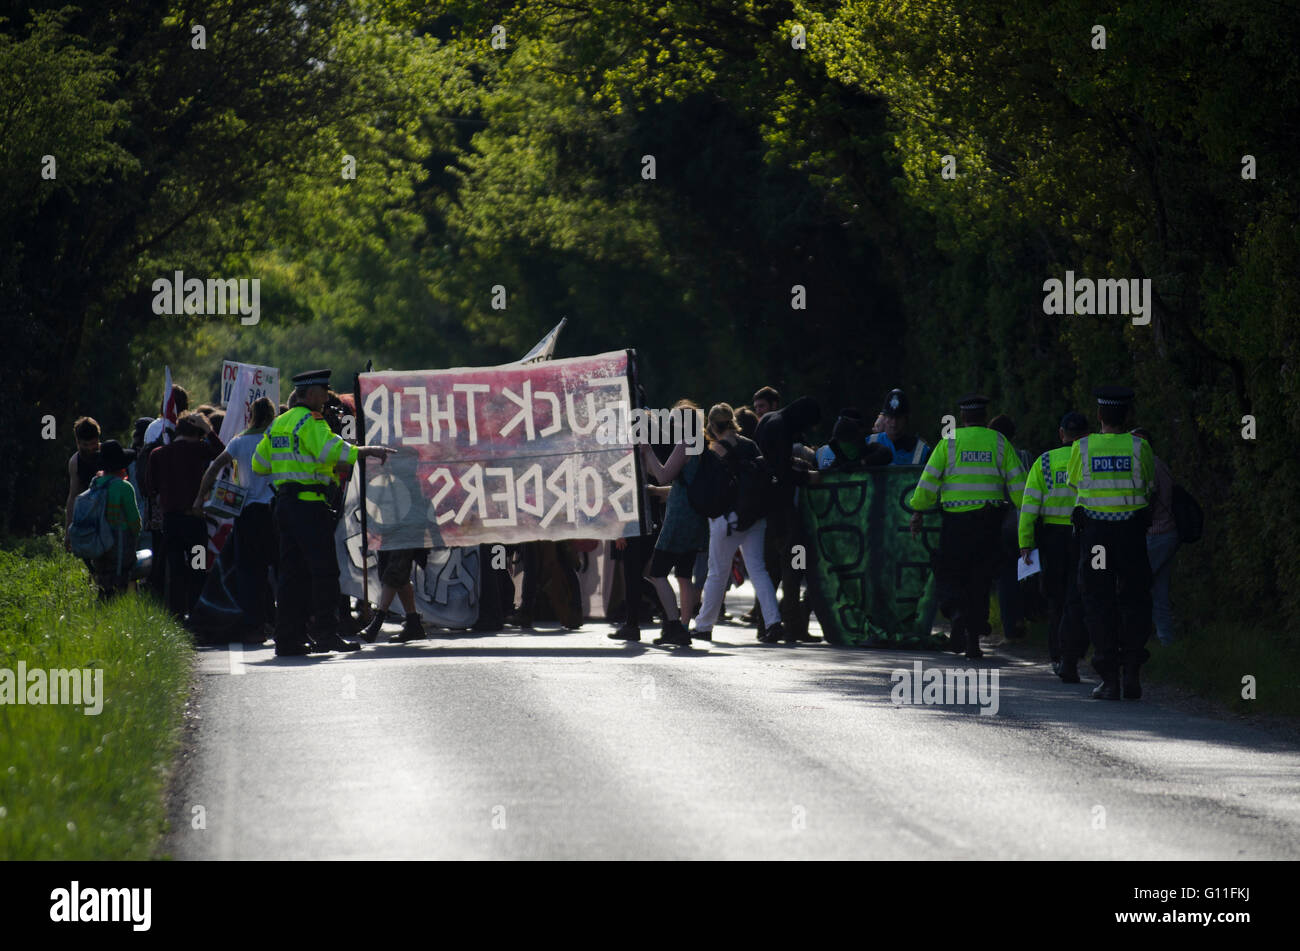 London Gatwick, UK. 7th May 2016. International Day of Action Against Detention. Demonstrations outside Brook House & Tinsley House Immigration Removal Centres at Gatwick Airport. Protesters are calling to “shut down detention centres – migrants welcome, open borders”, with the campaign #ShutThemDown. The centres, run by private security firm G4S, are said to be detaining asylum seekers and foreigners without charge whilst under ‘administrative detention’. Stock Photo